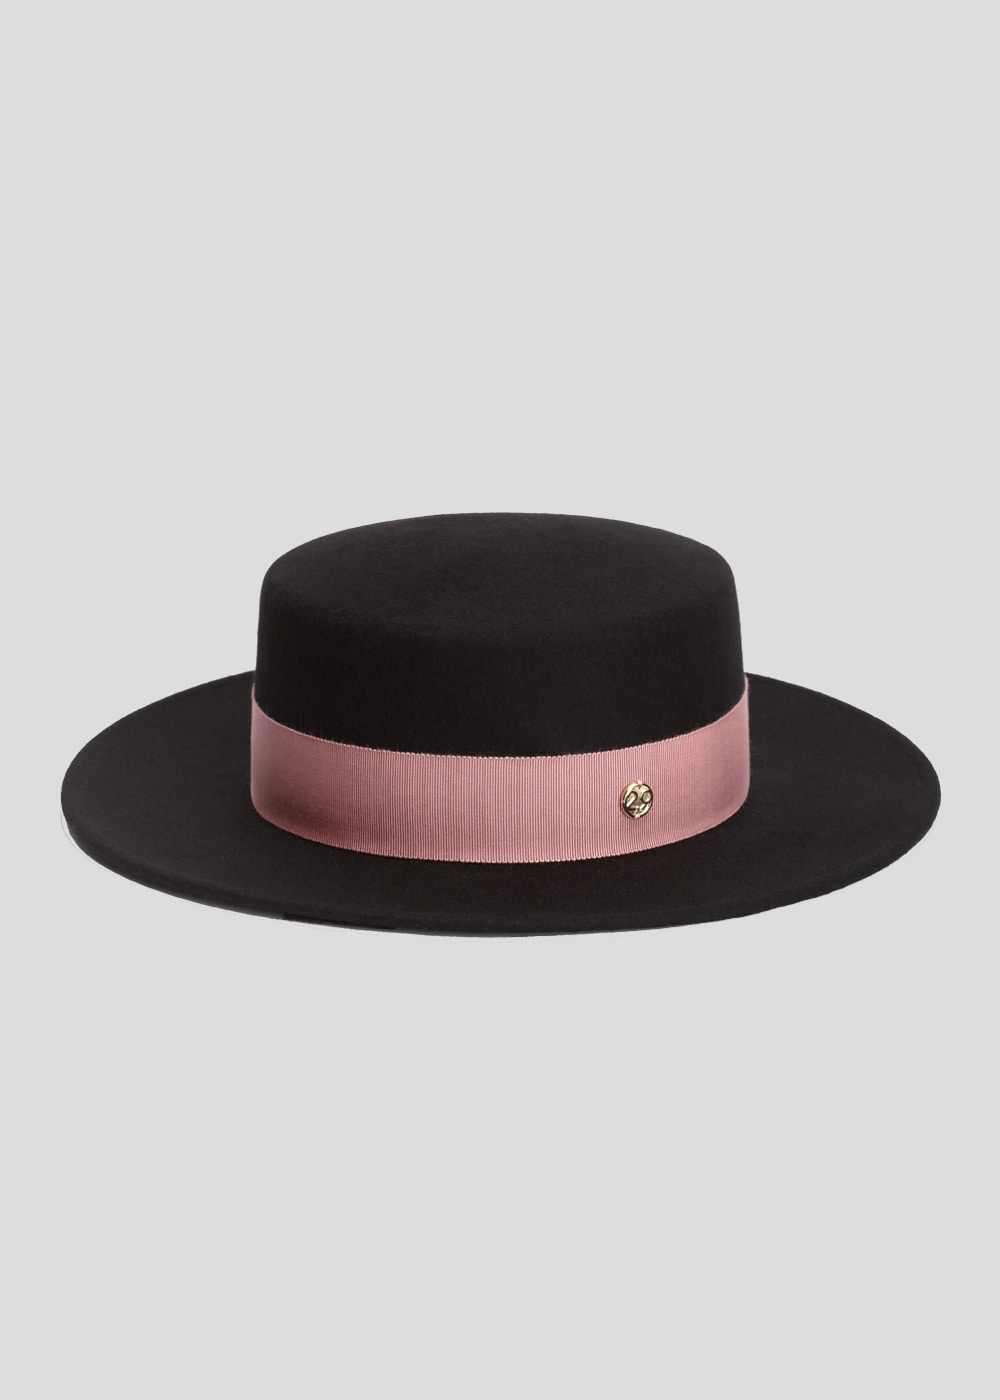 classic boater black/ Indian pink 